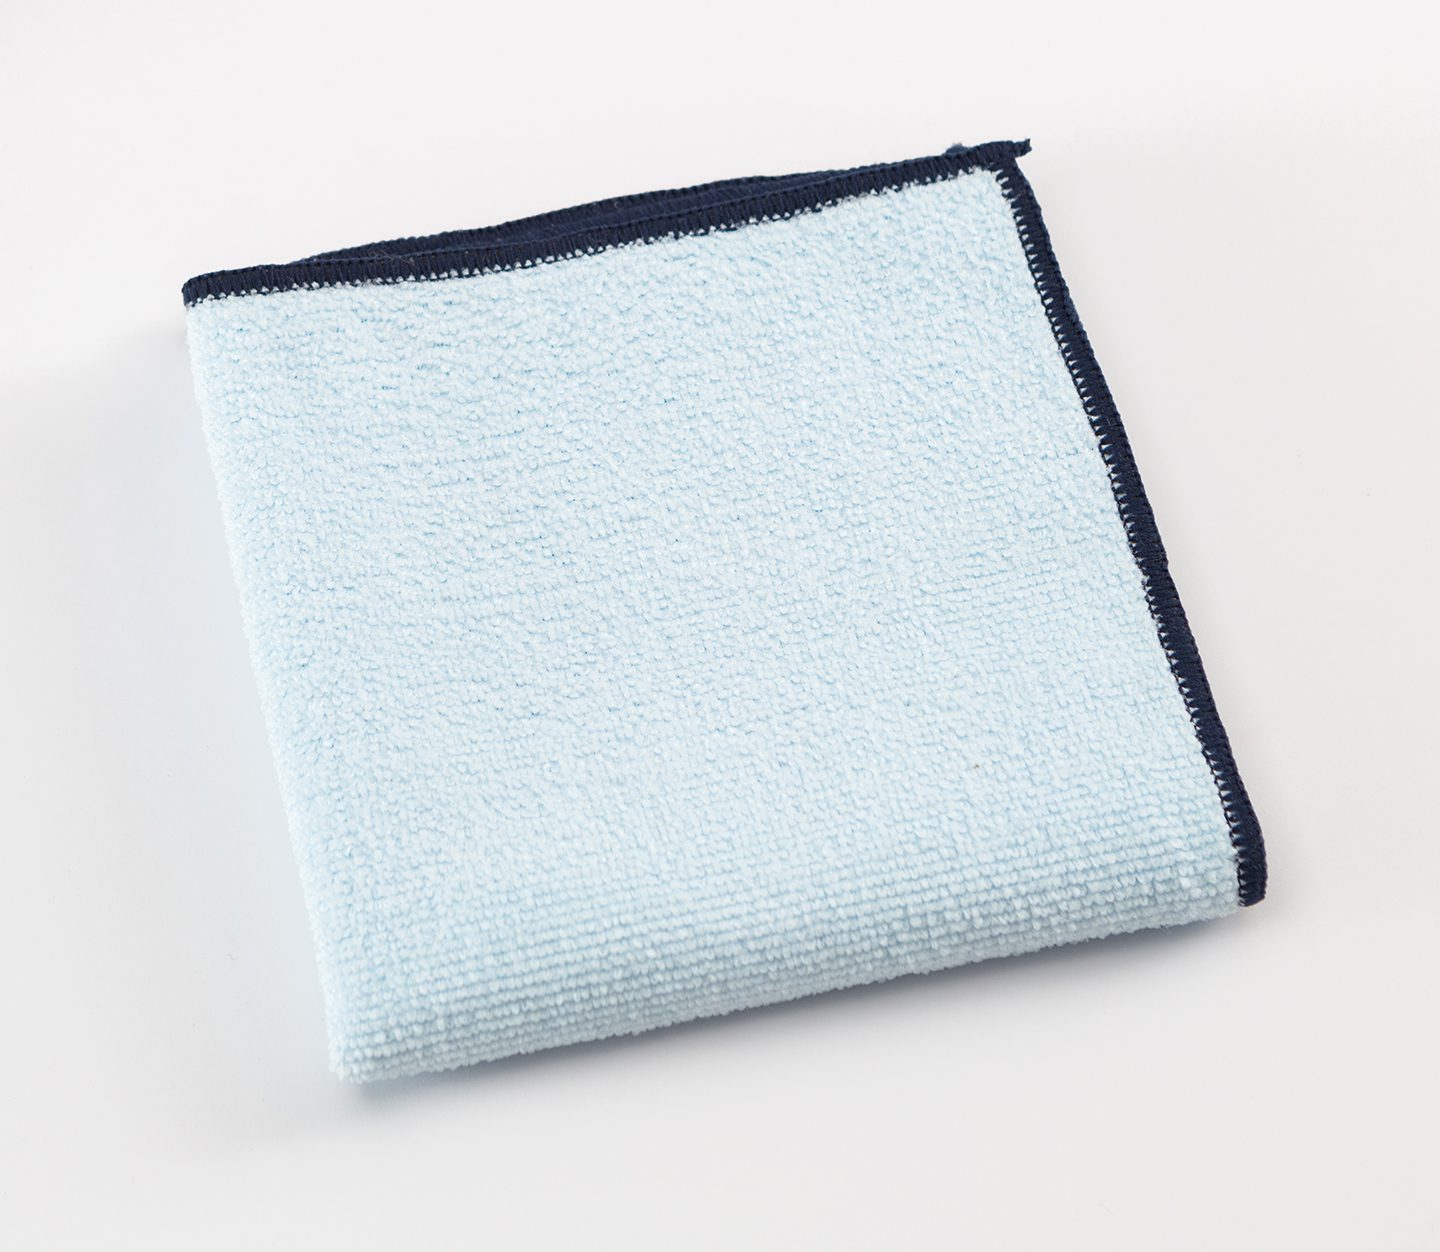 Microfiber vs. Cotton Towels: What Do the Experts Use?